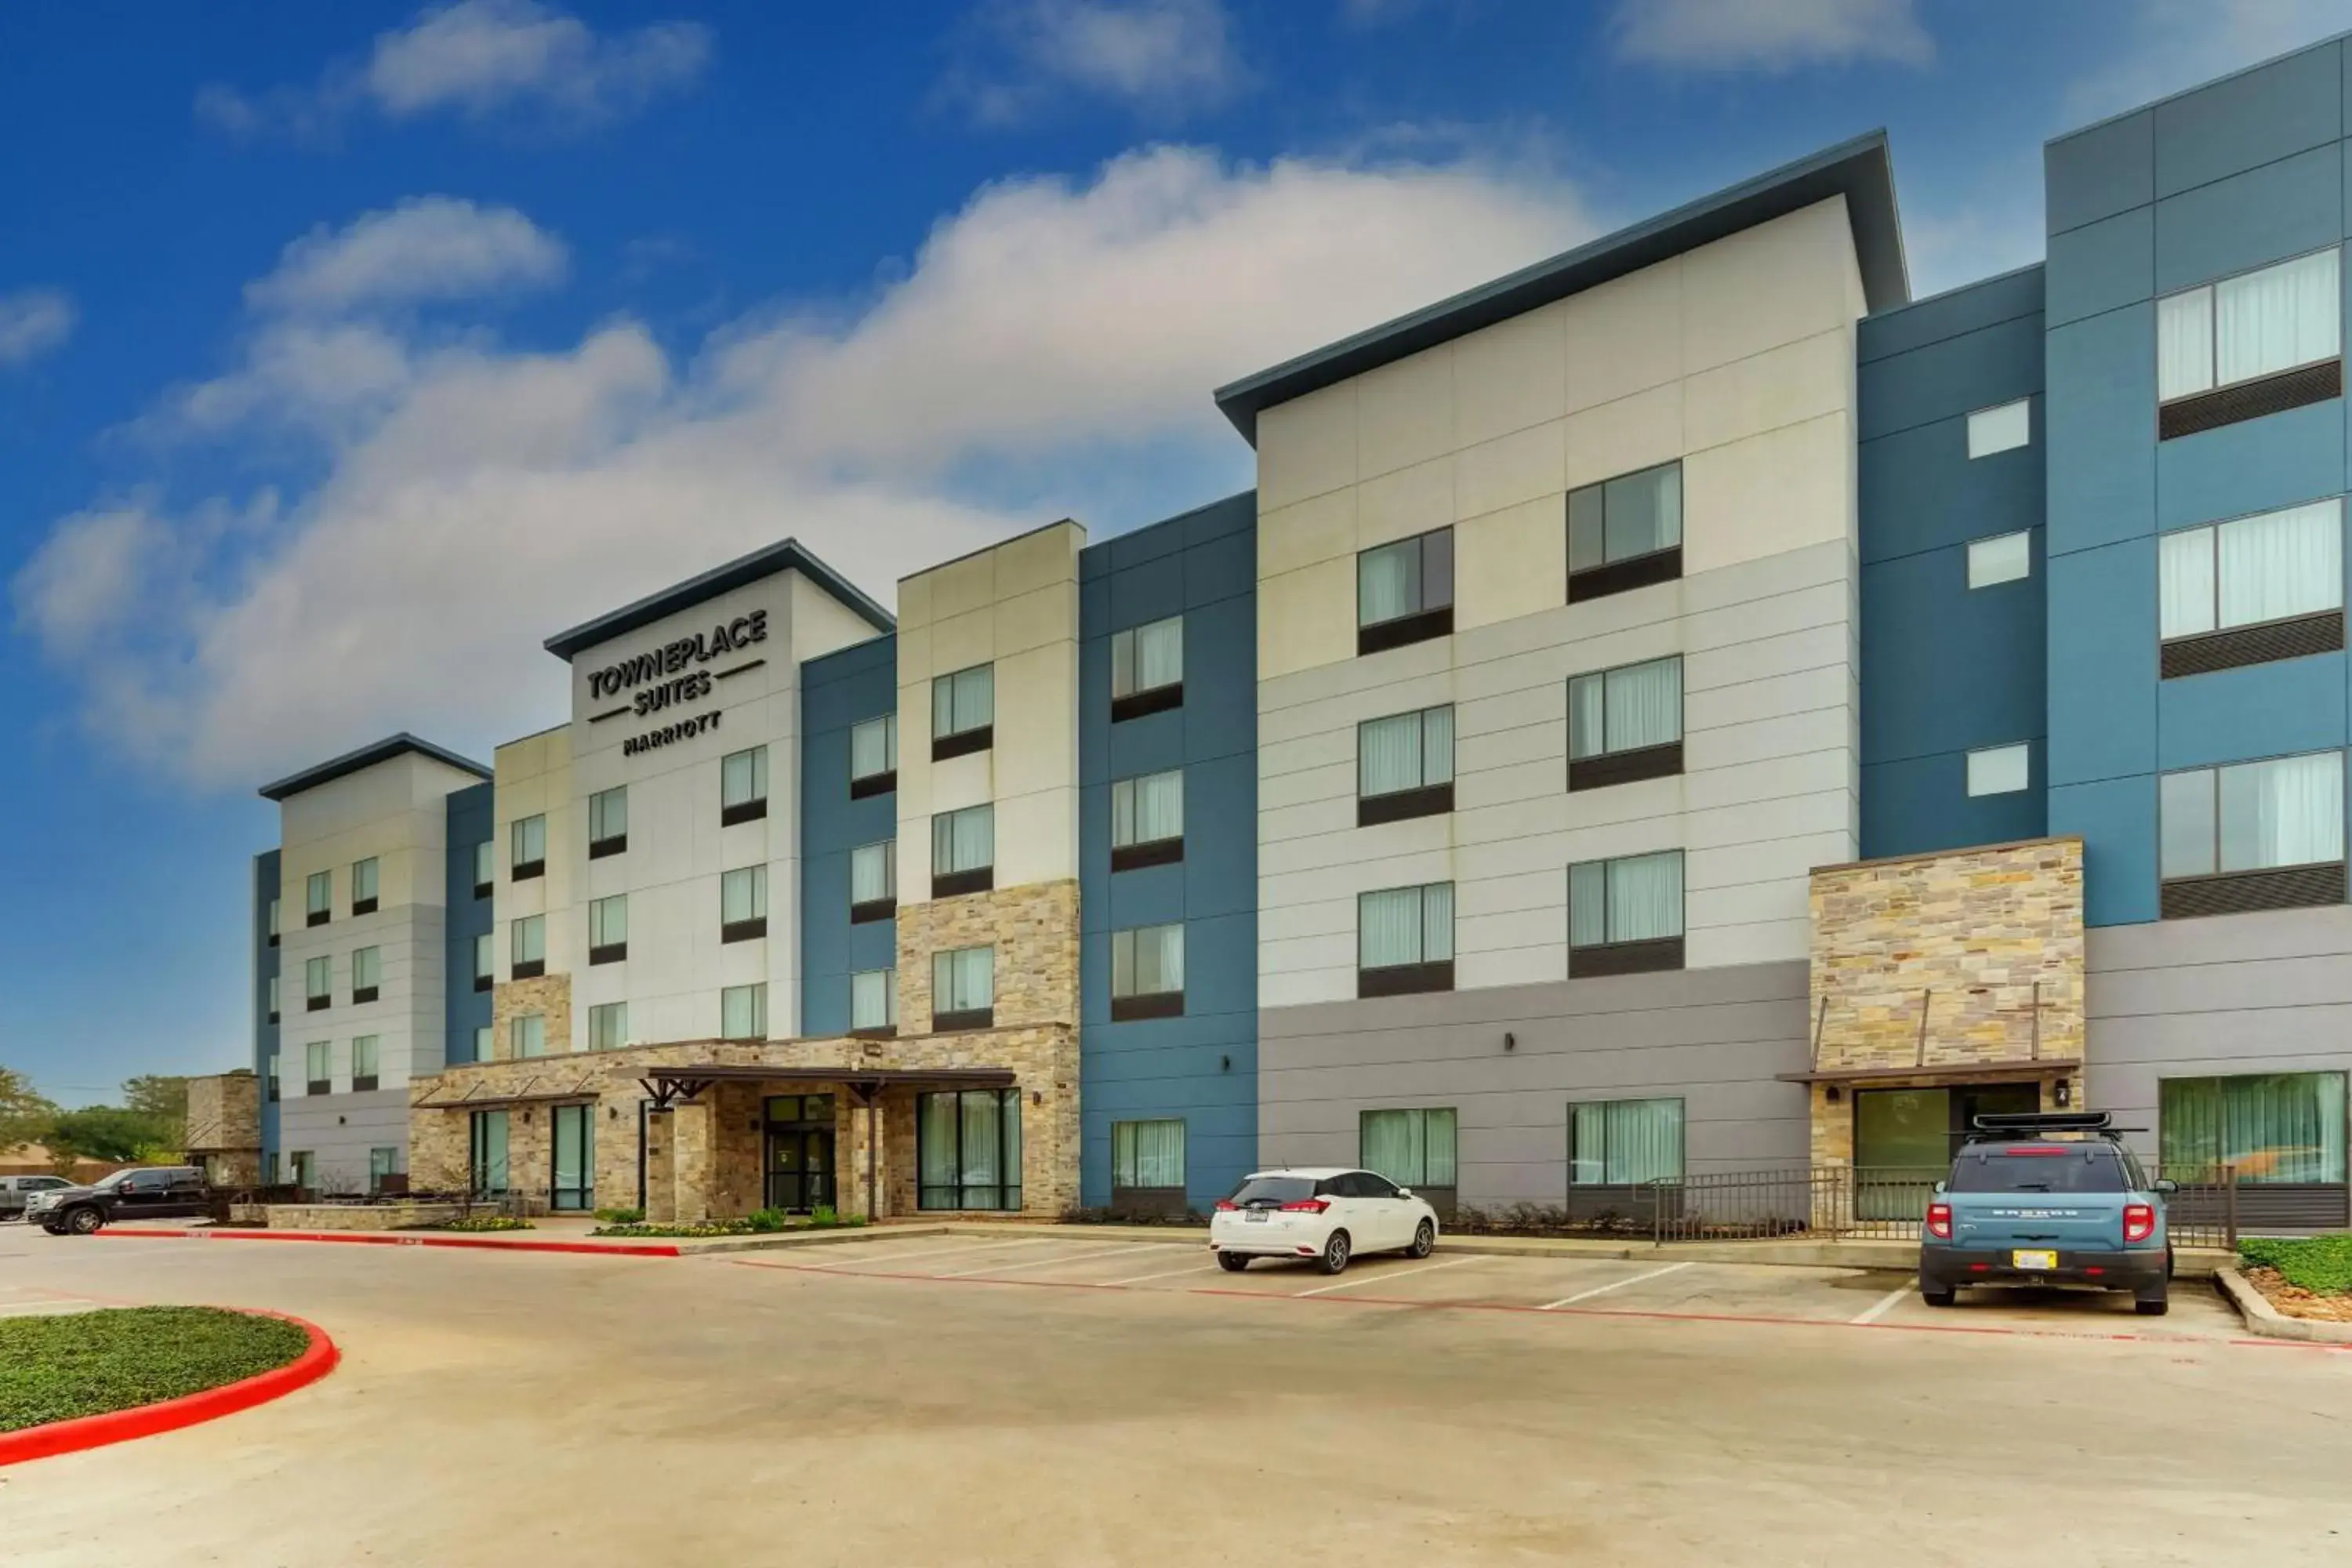 Property Building in TownePlace Suites by Marriott Houston I-10 East